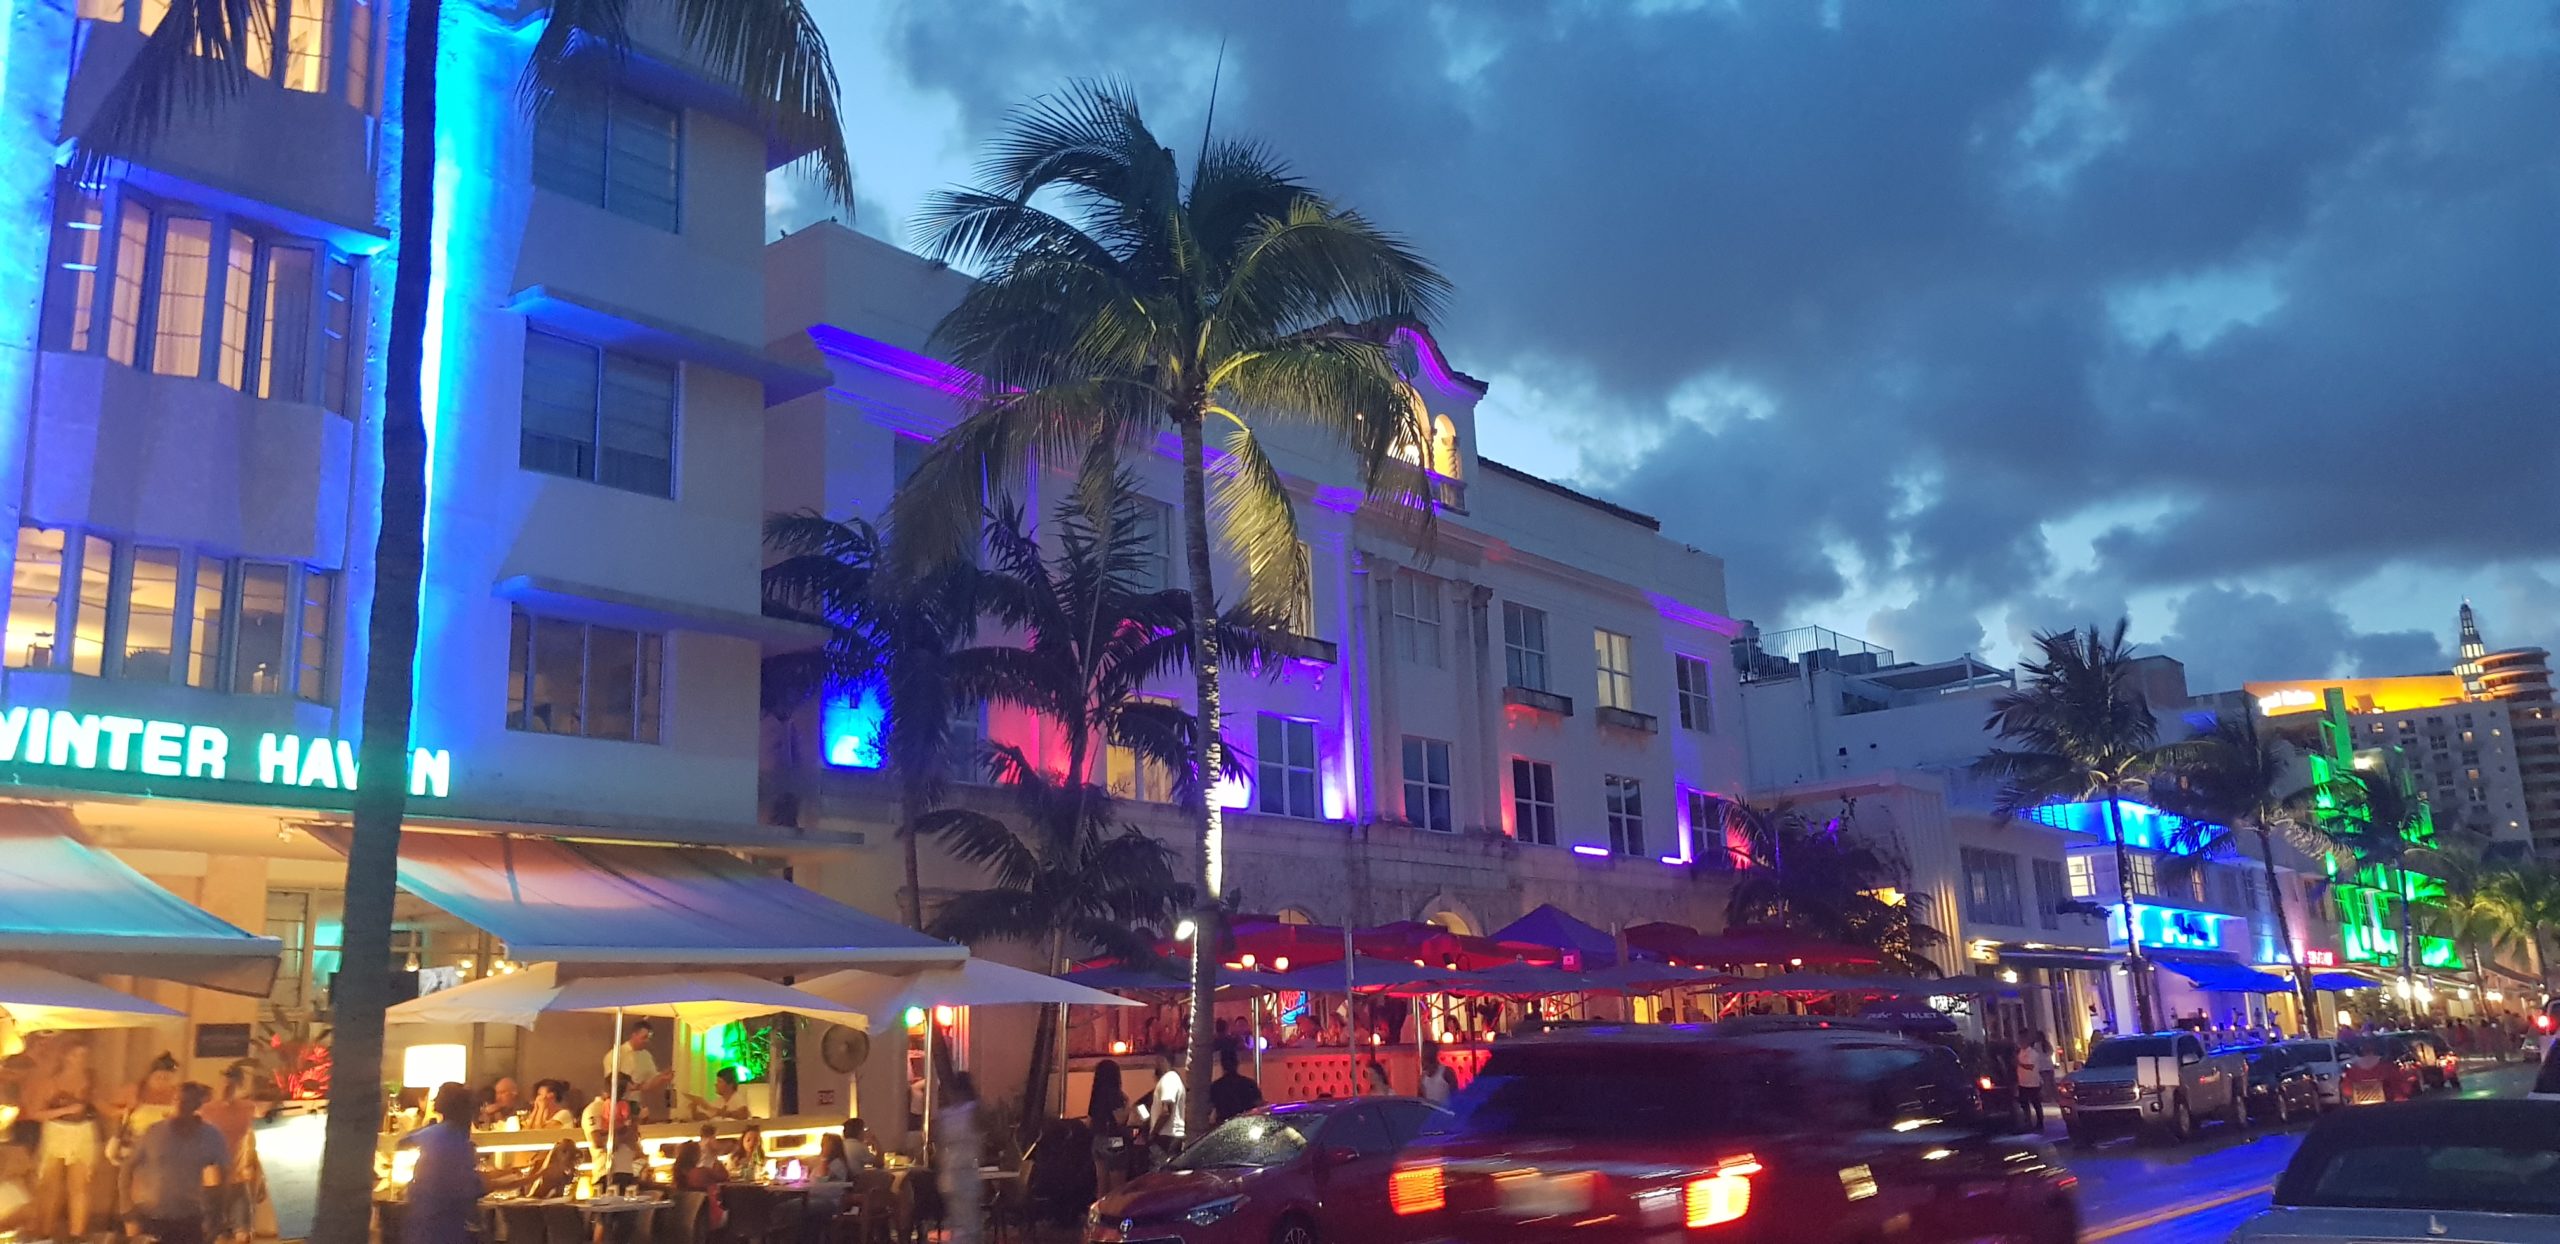 Welcome to Miami - Ocean Drive by night - PopCulturetrips.com